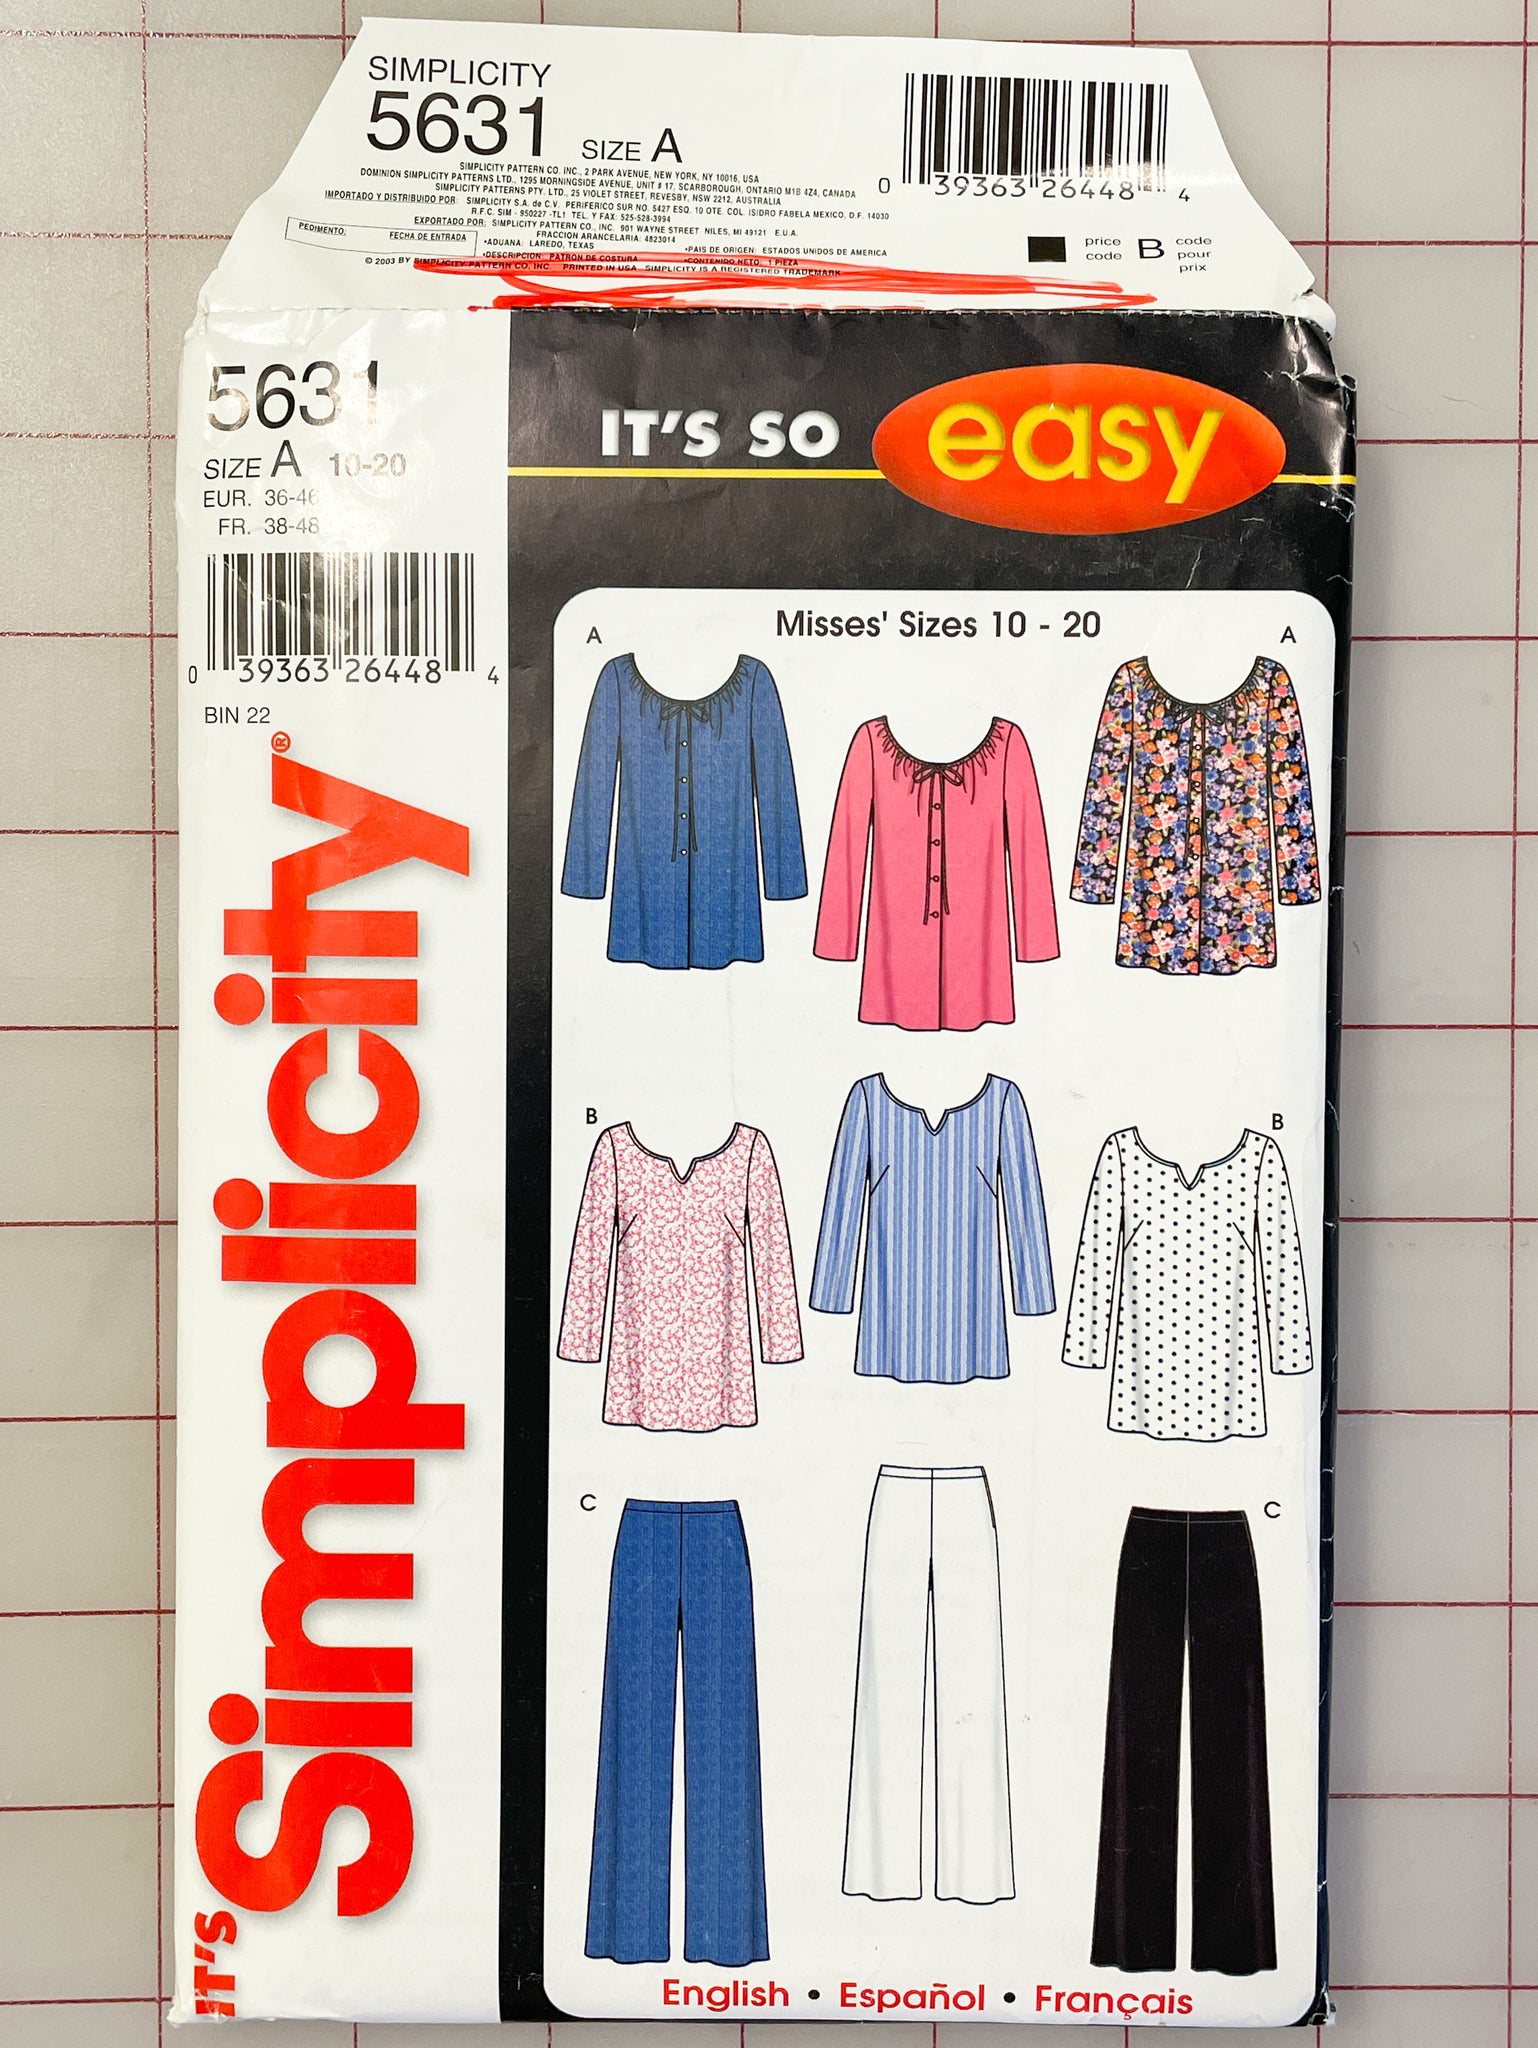 2003 Simplicity 5631 Pattern - Blouses and Pants FACTORY FOLDED